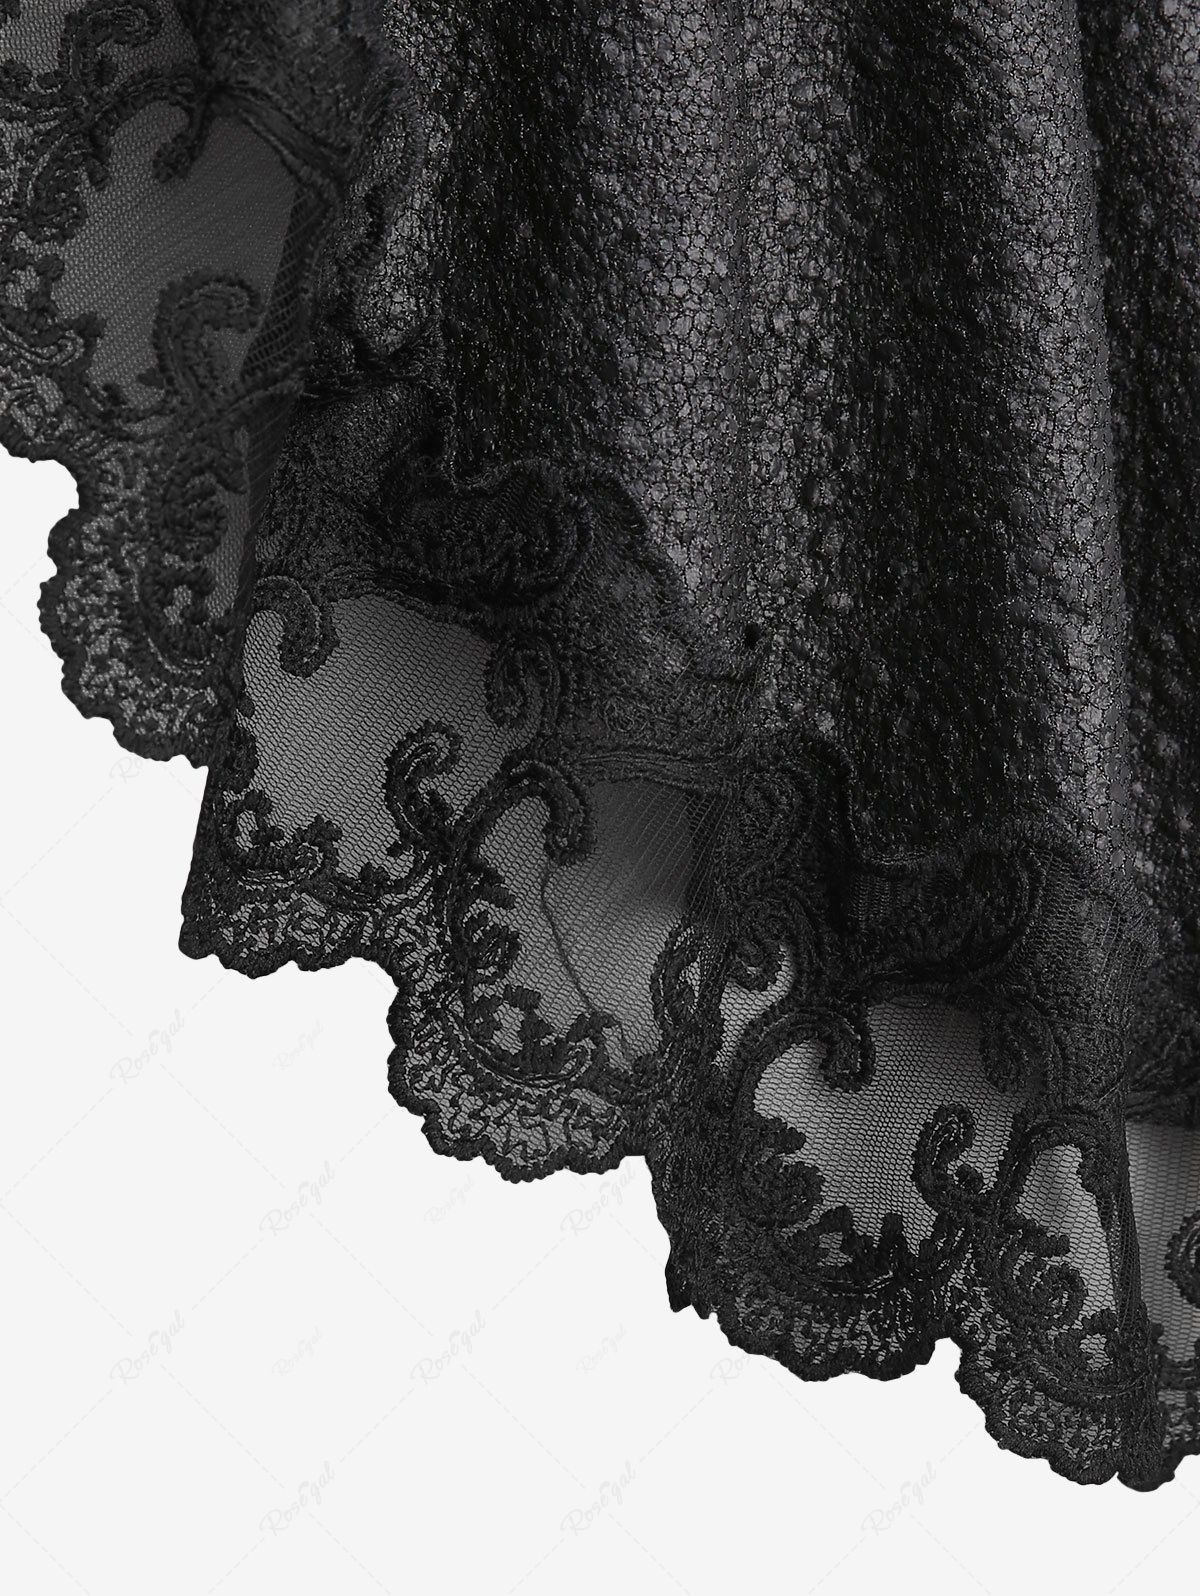 💗Lauren Loves💗 Gothic Crack Textured Floral Lace Trim Hook and Eye Ruffles Asymmetric High Low Long Sleeves Coat